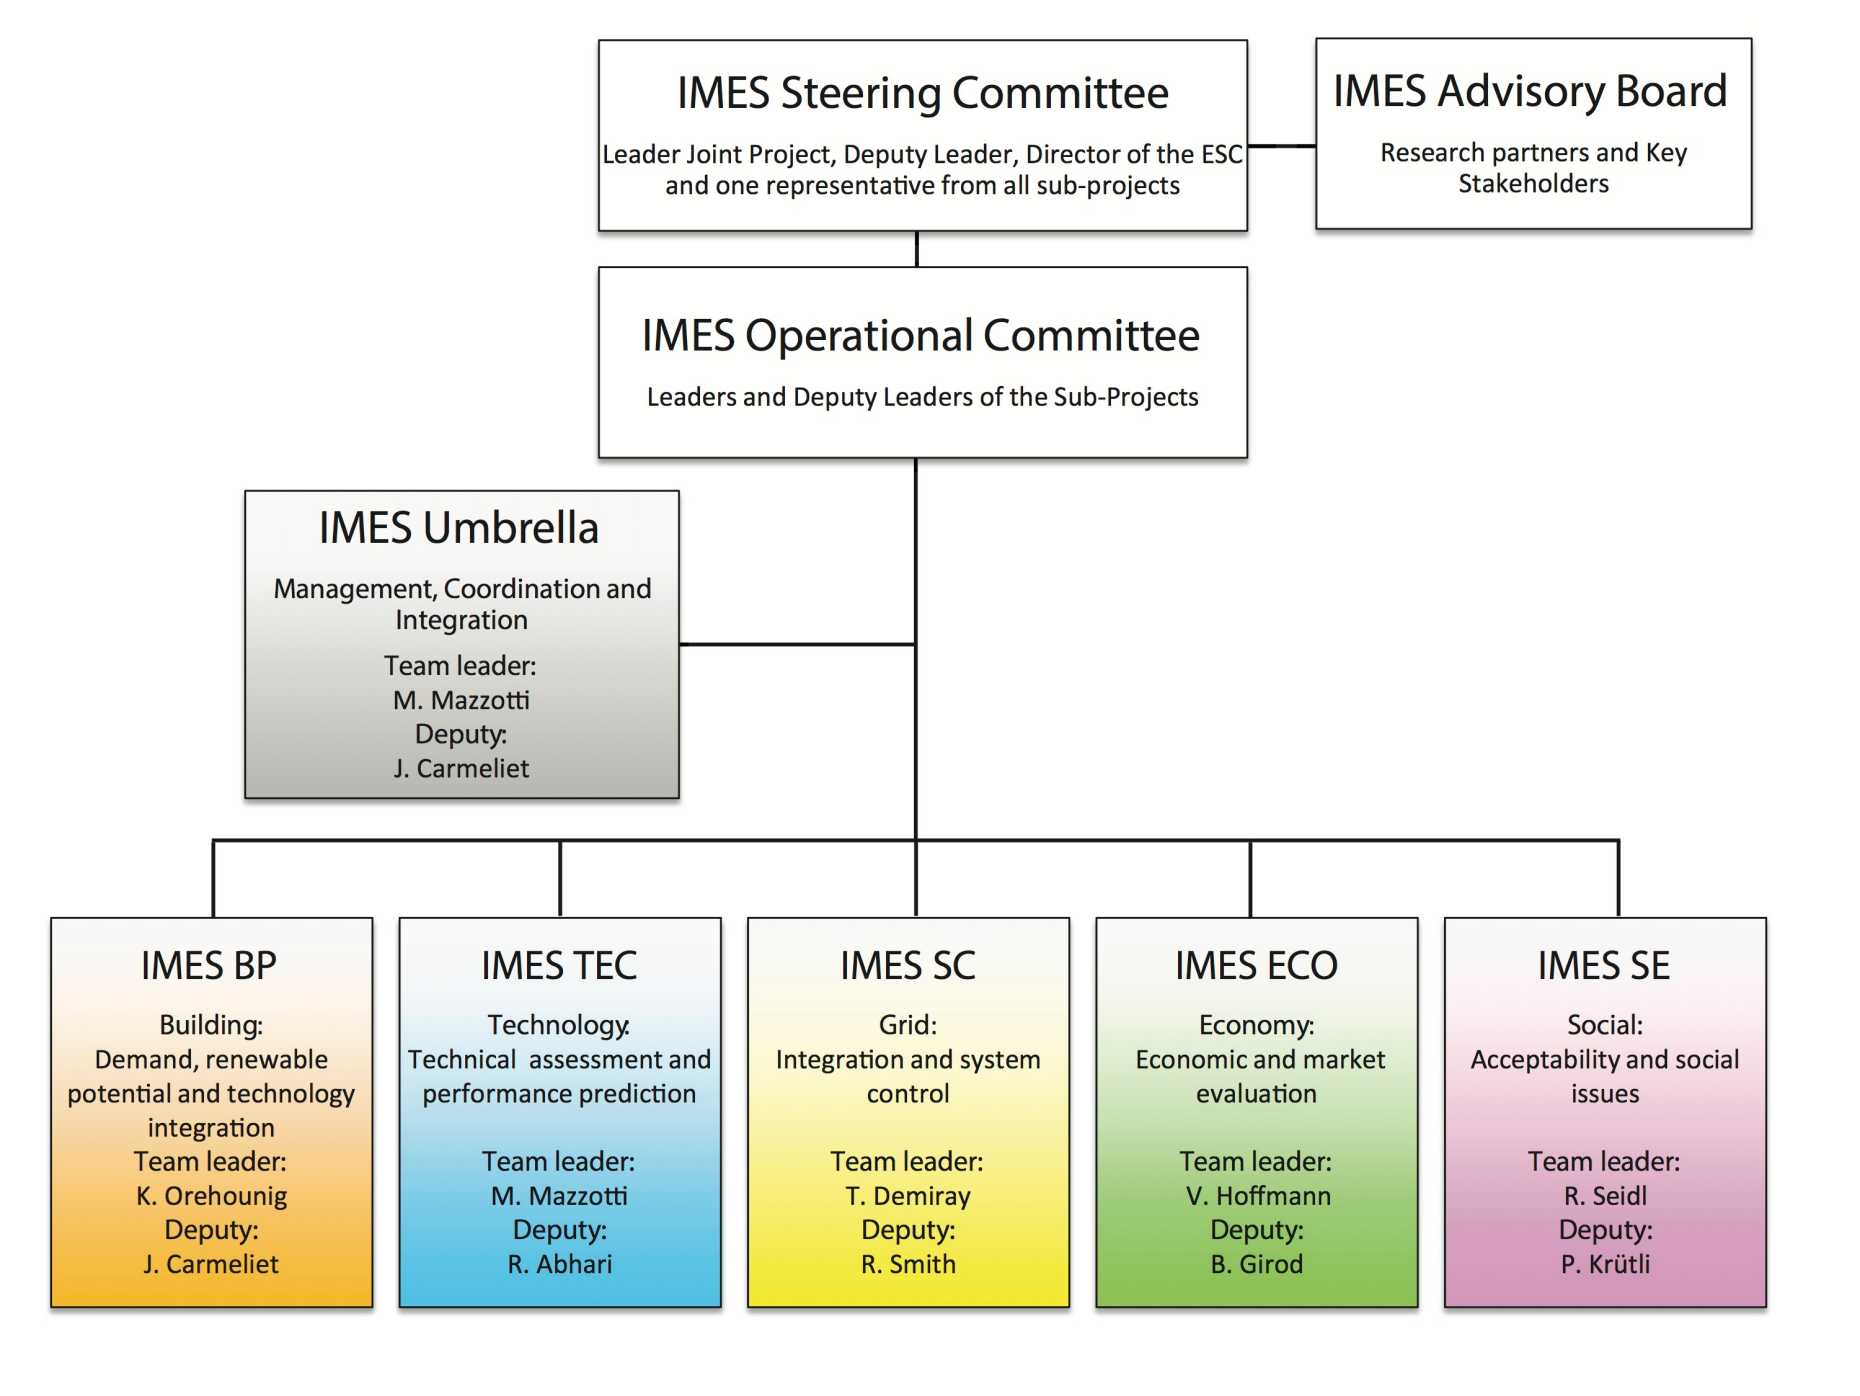 Enlarged view: IMES - structure